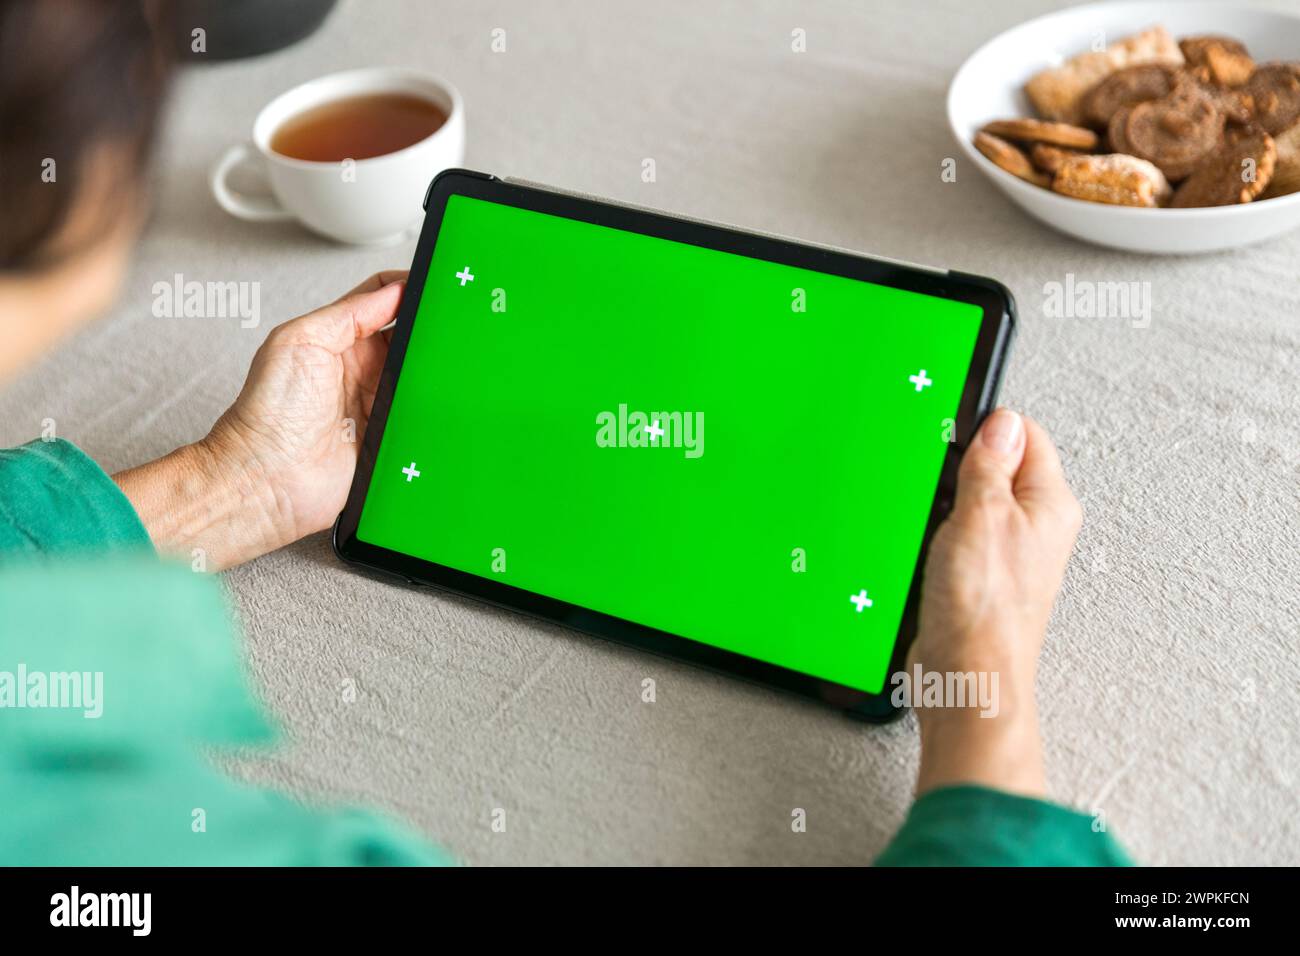 tablet with green screen chromakey display in elderly woman hand Stock Photo